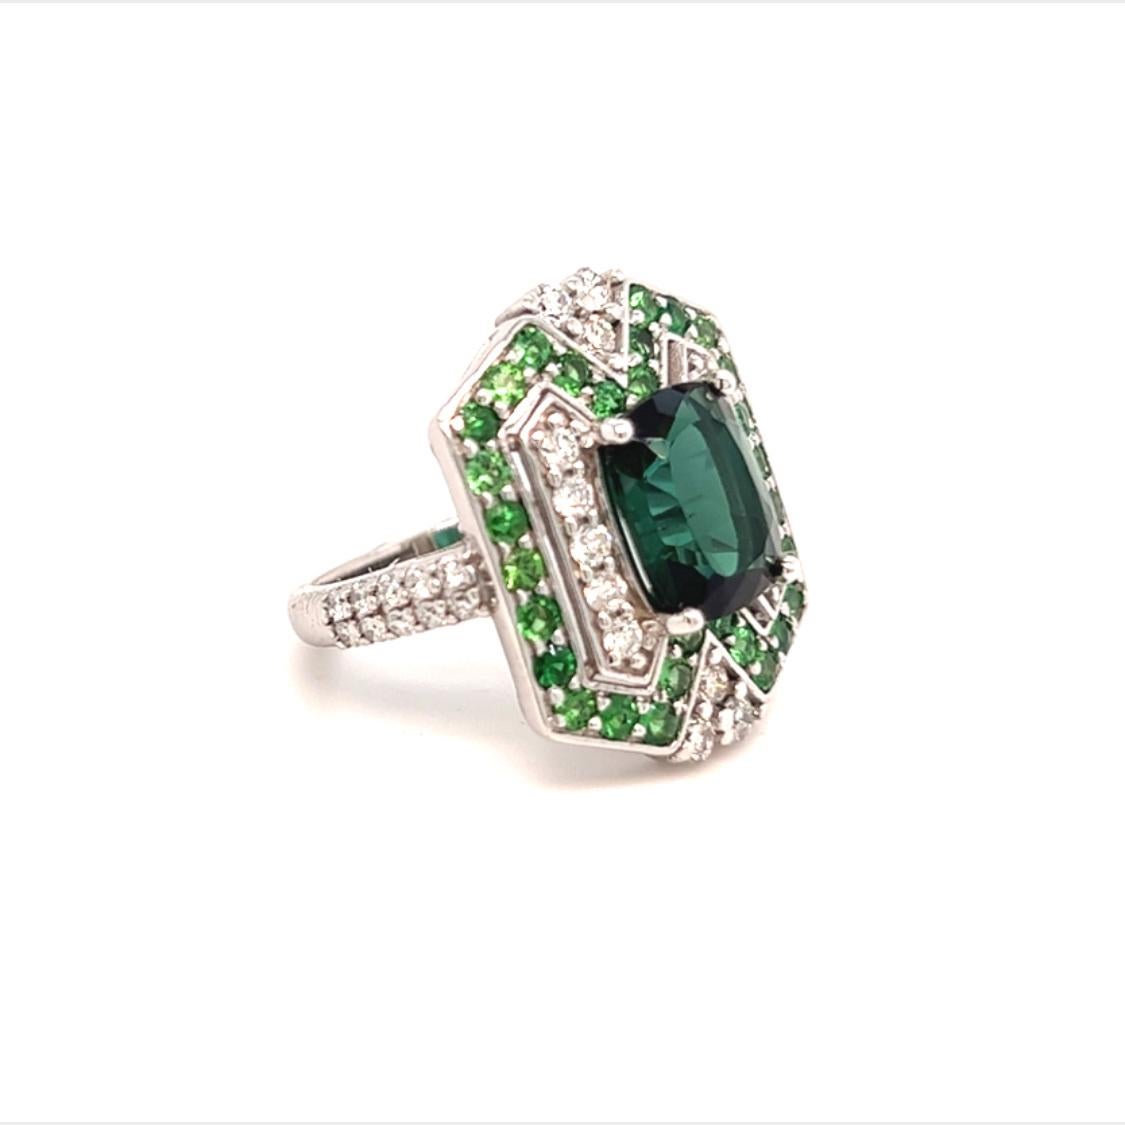 Tourmaline Tsavorite Diamond Ring Size 6.25 14k Gold 5.55 TCW GIA Certified $7,550 215422

This fine piece of jewelry is designed by Enrico Kassini!

Nothing says, “I Love you” more than Diamonds and Pearls!

This item has been Certified, Inspected,